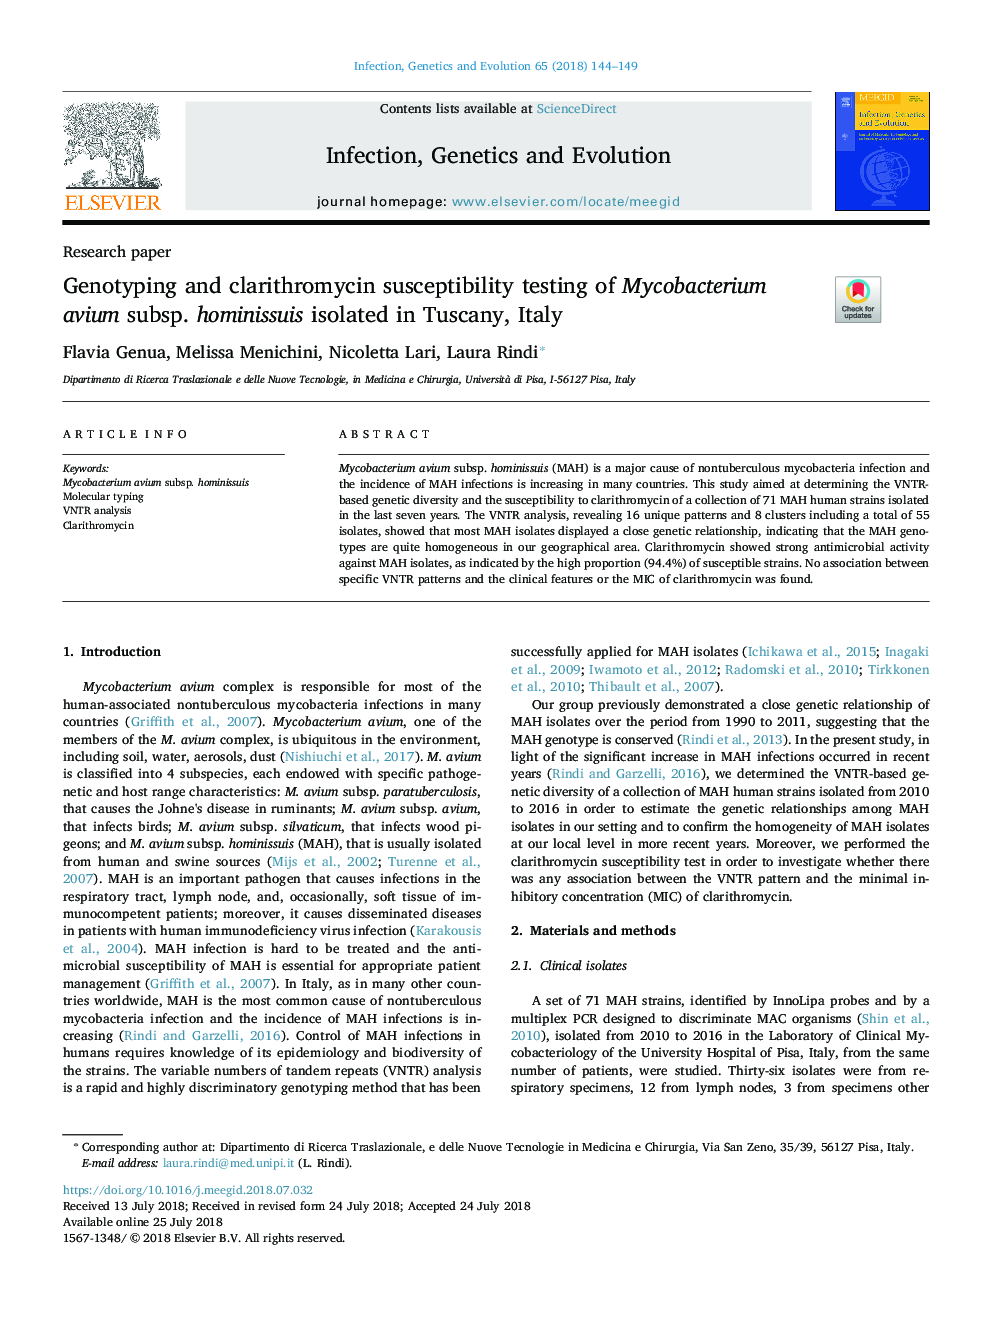 Genotyping and clarithromycin susceptibility testing of Mycobacterium avium subsp. hominissuis isolated in Tuscany, Italy